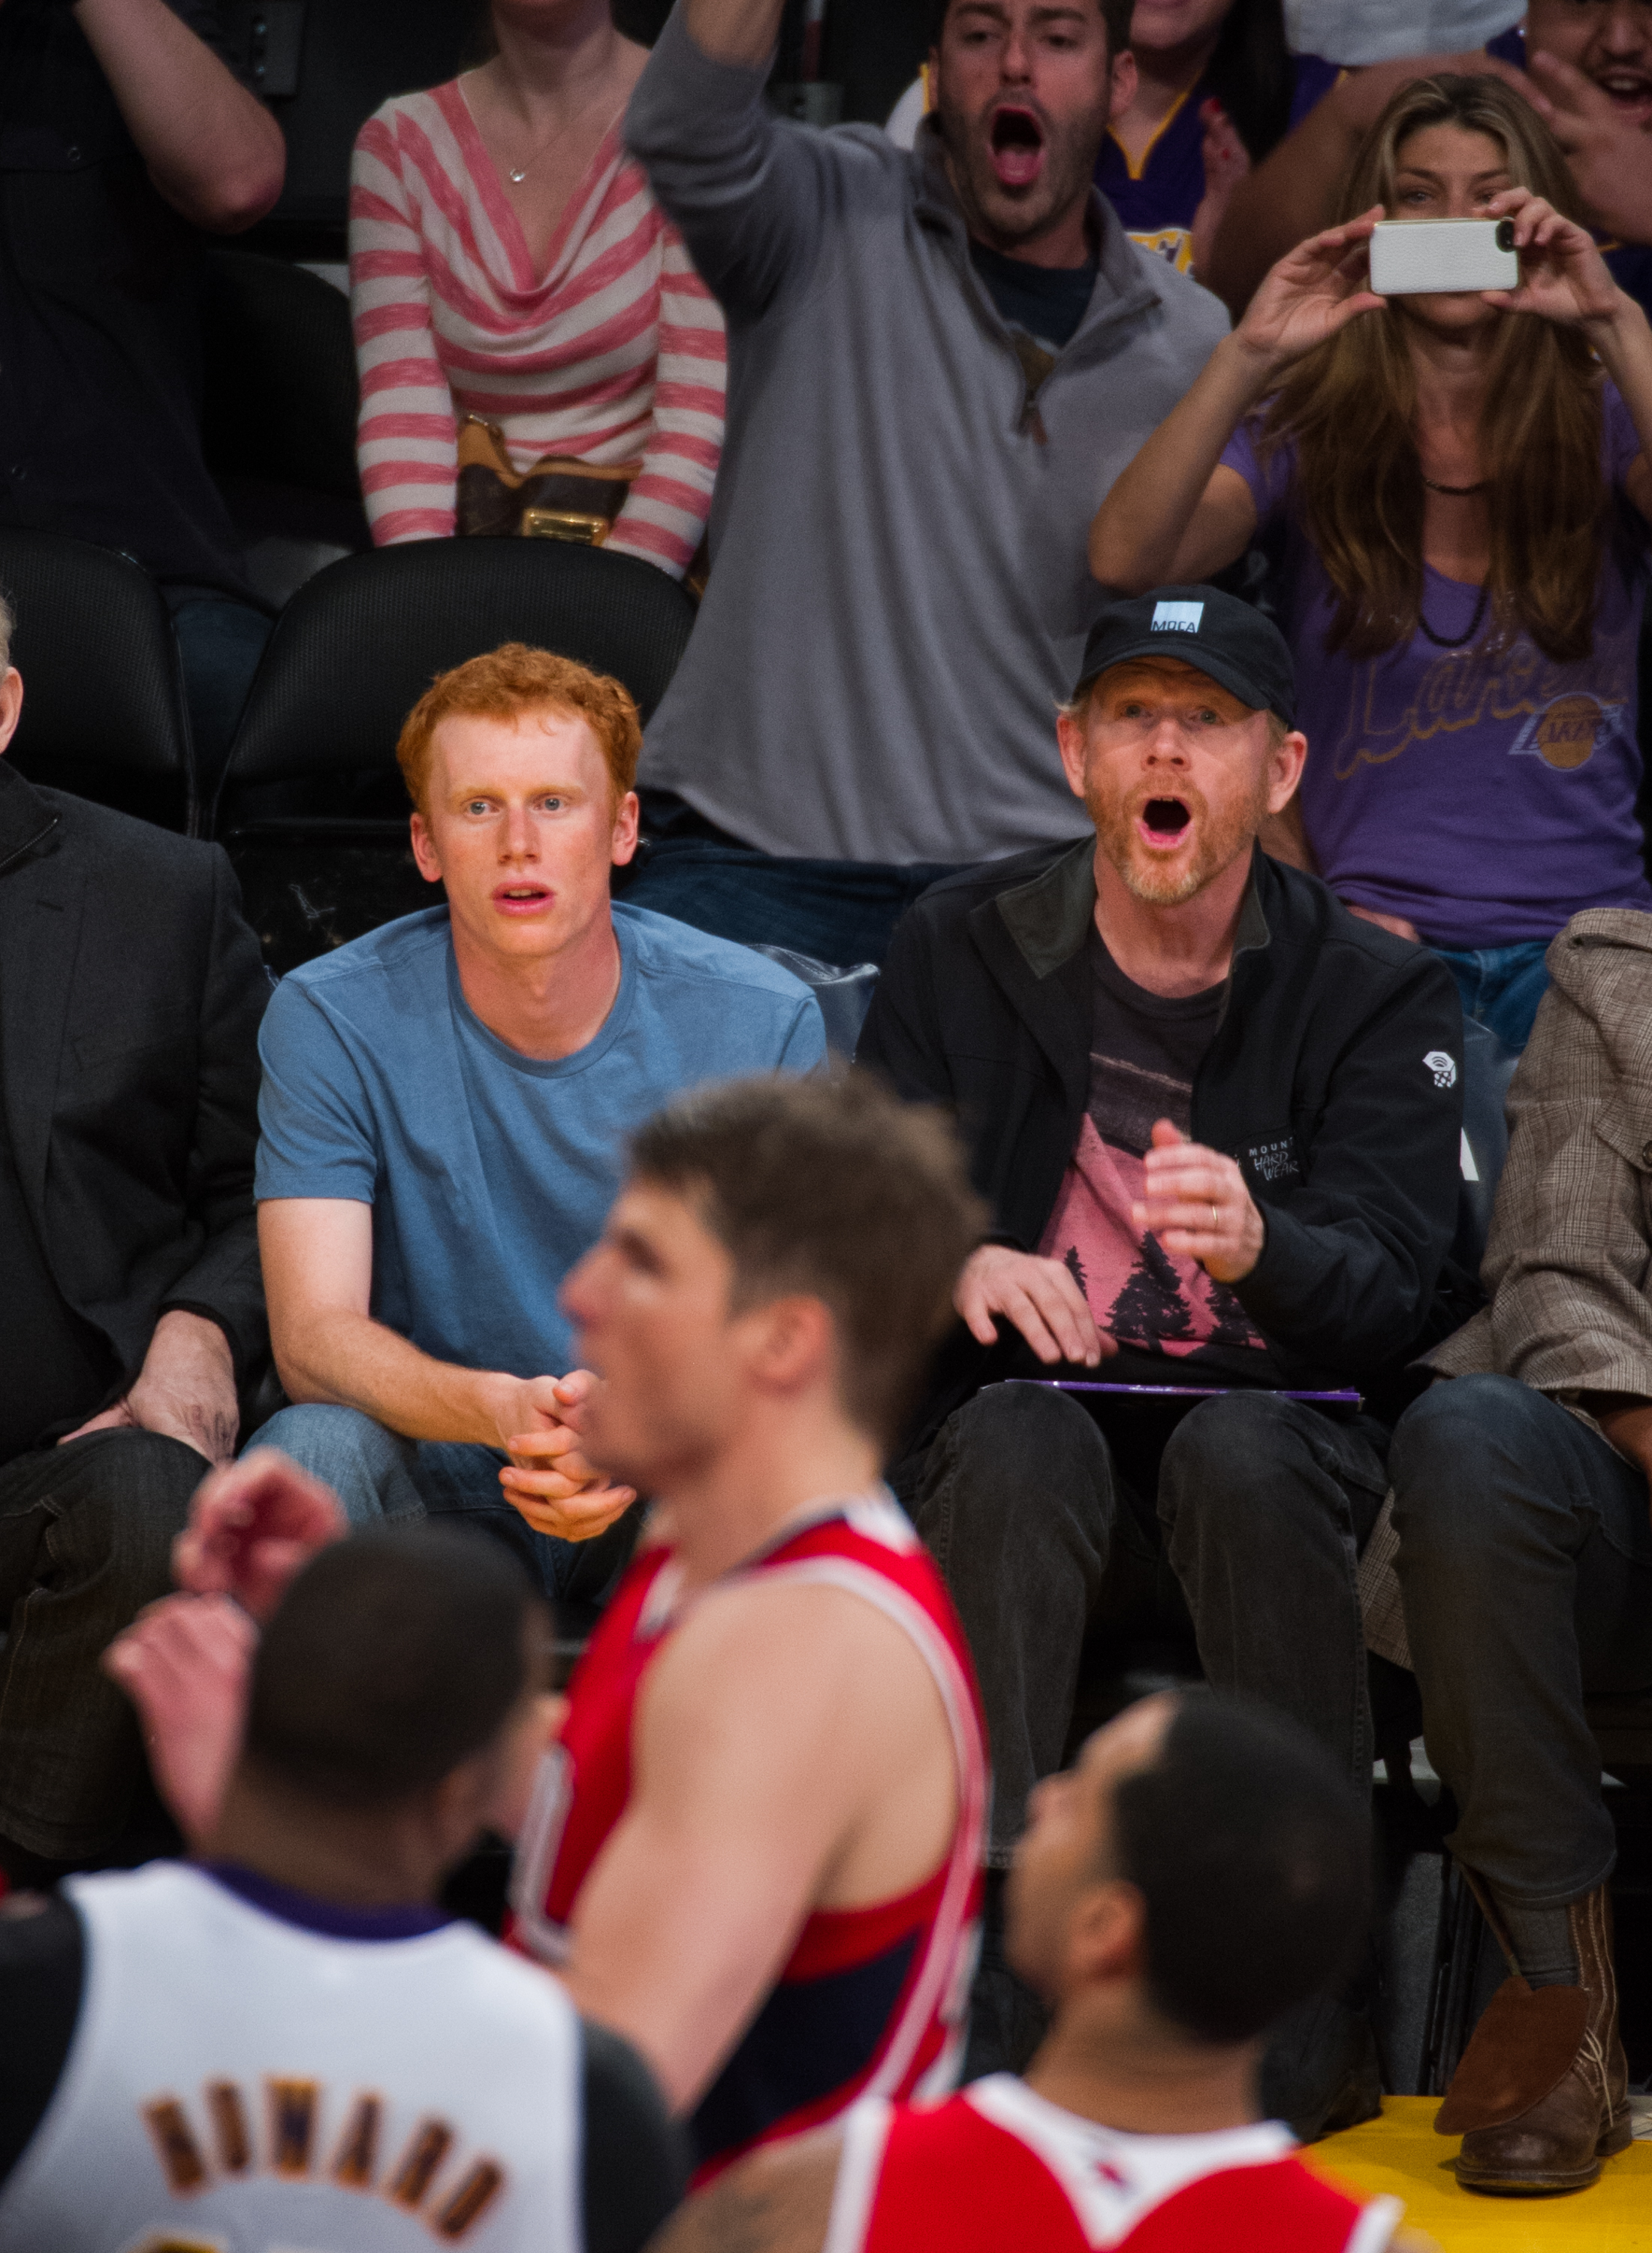 Reed Howard and Ron Howard at a basketball game at Staples Center on March 3, 2013 in Los Angeles, California. | Source: Getty Images